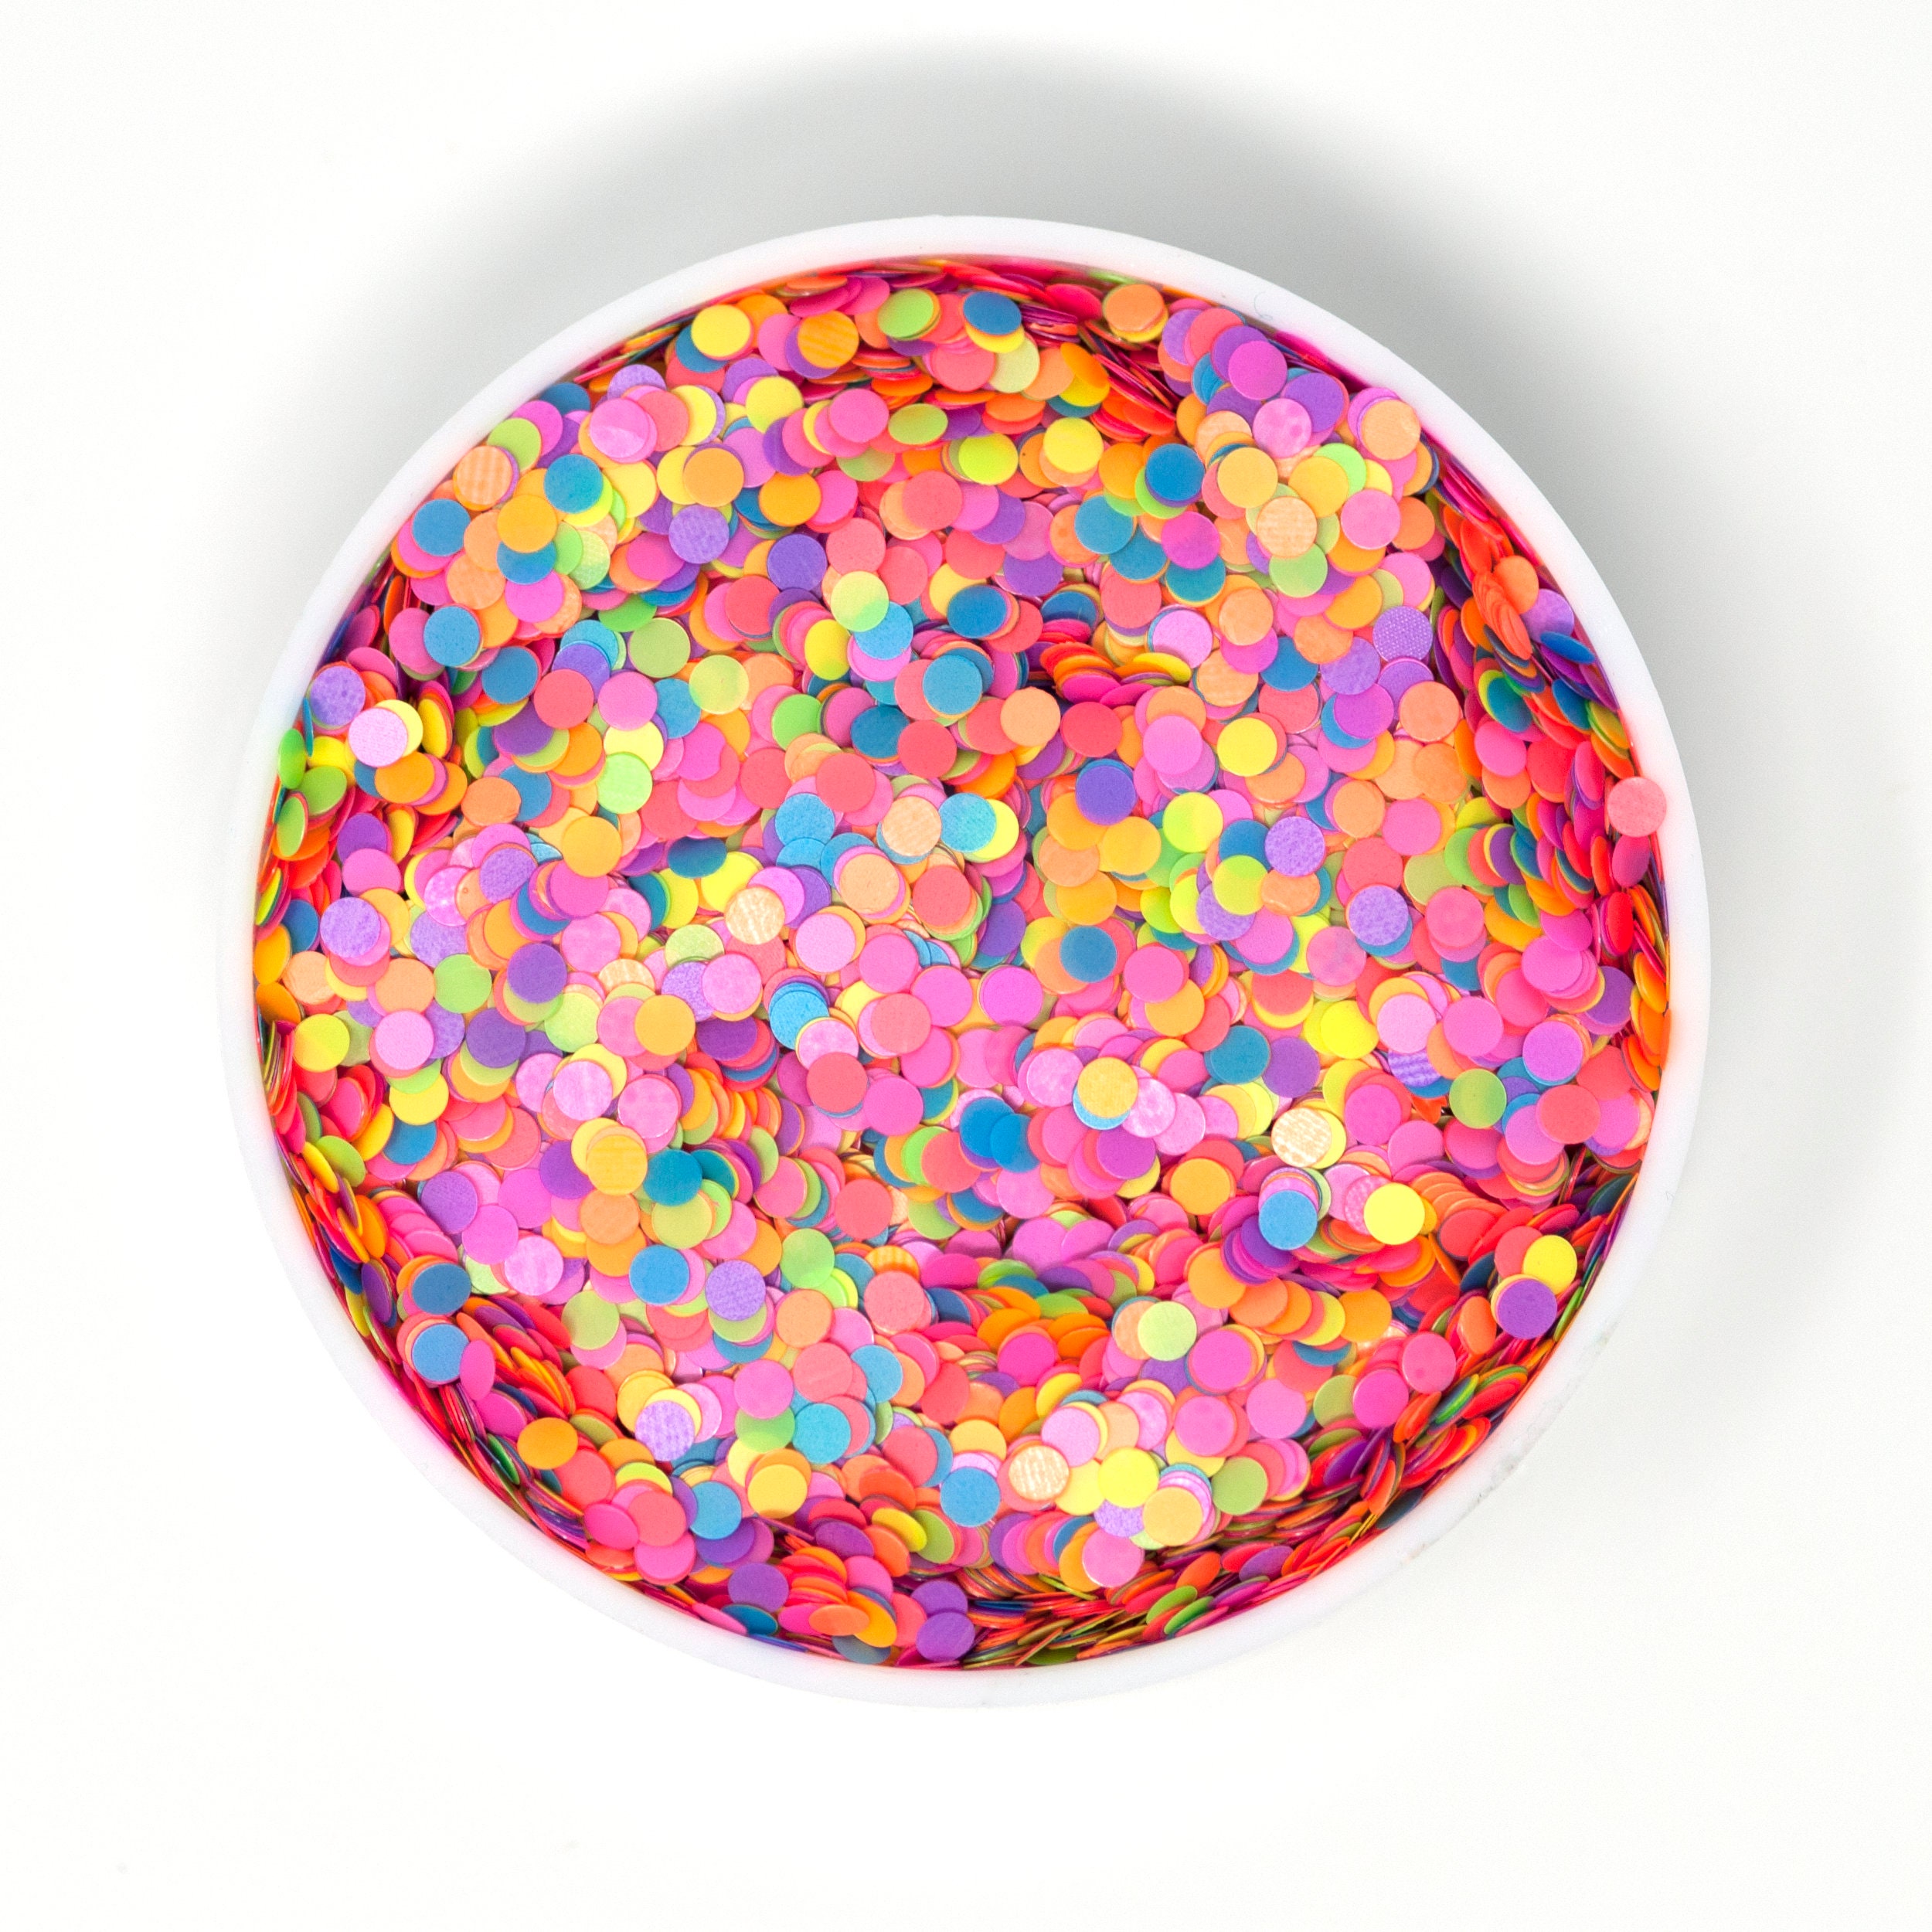 Confetti Mix colors Chunky glitter for Resin crafts, Glitter for